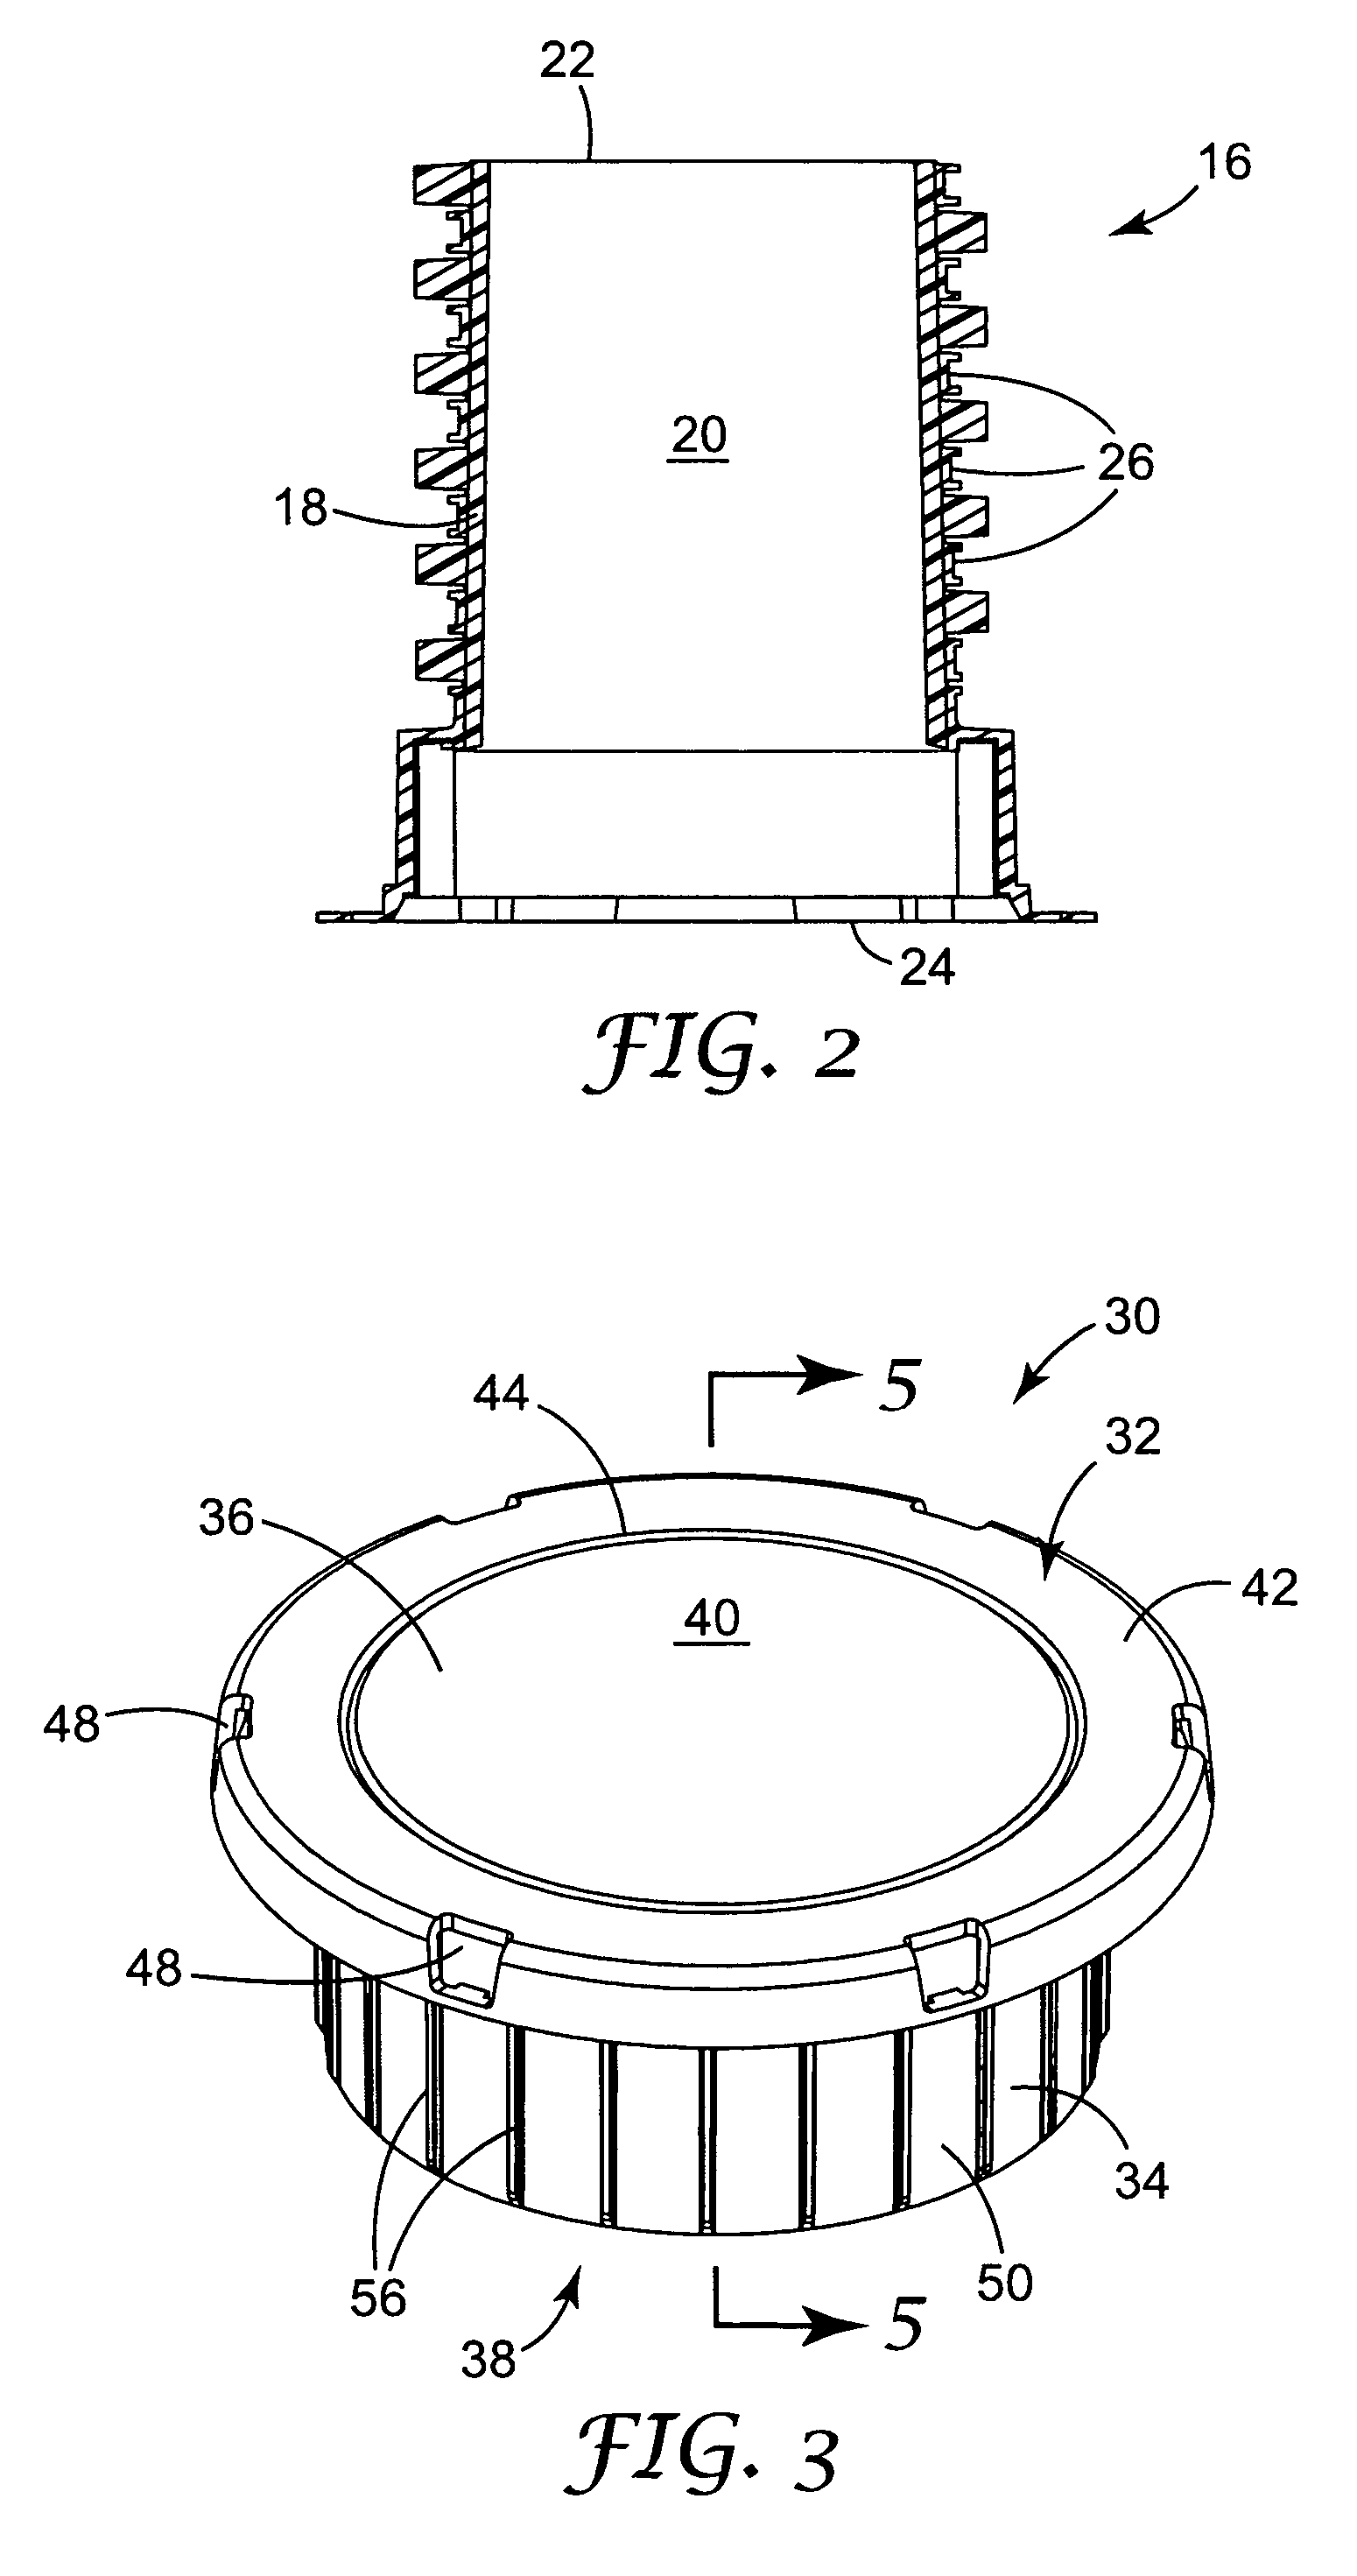 Apparatus and method for placement of a water closet fitting